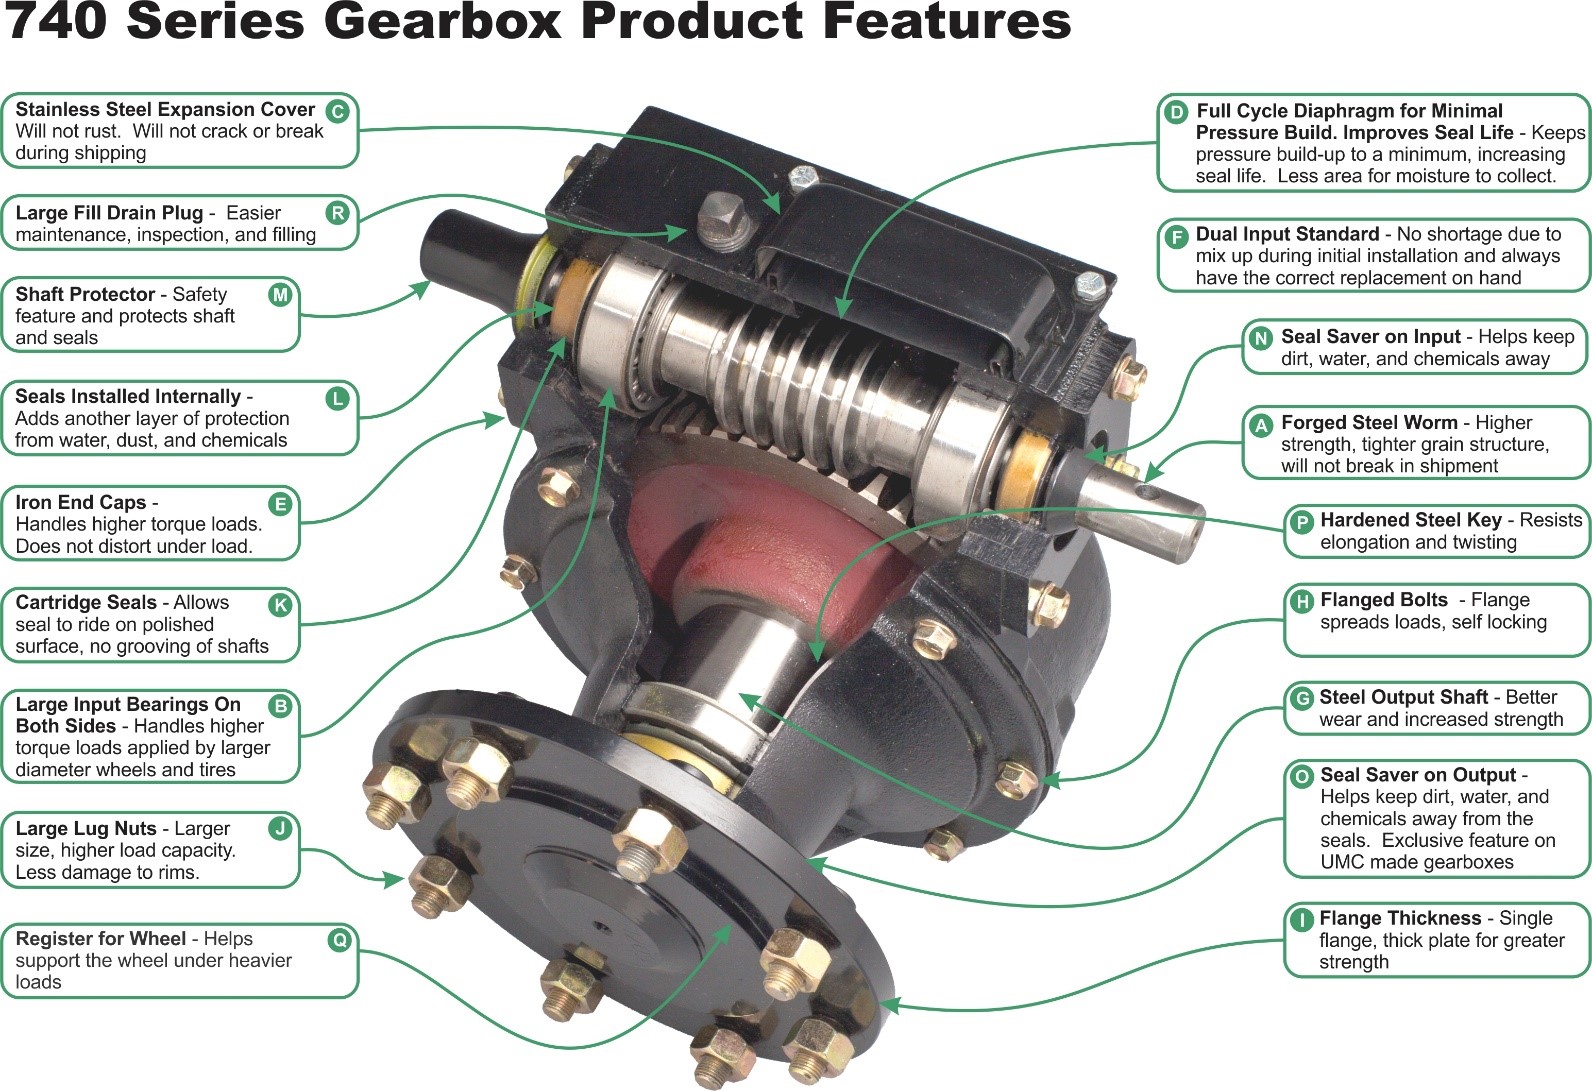 740-U Gearbox Features and Benefits